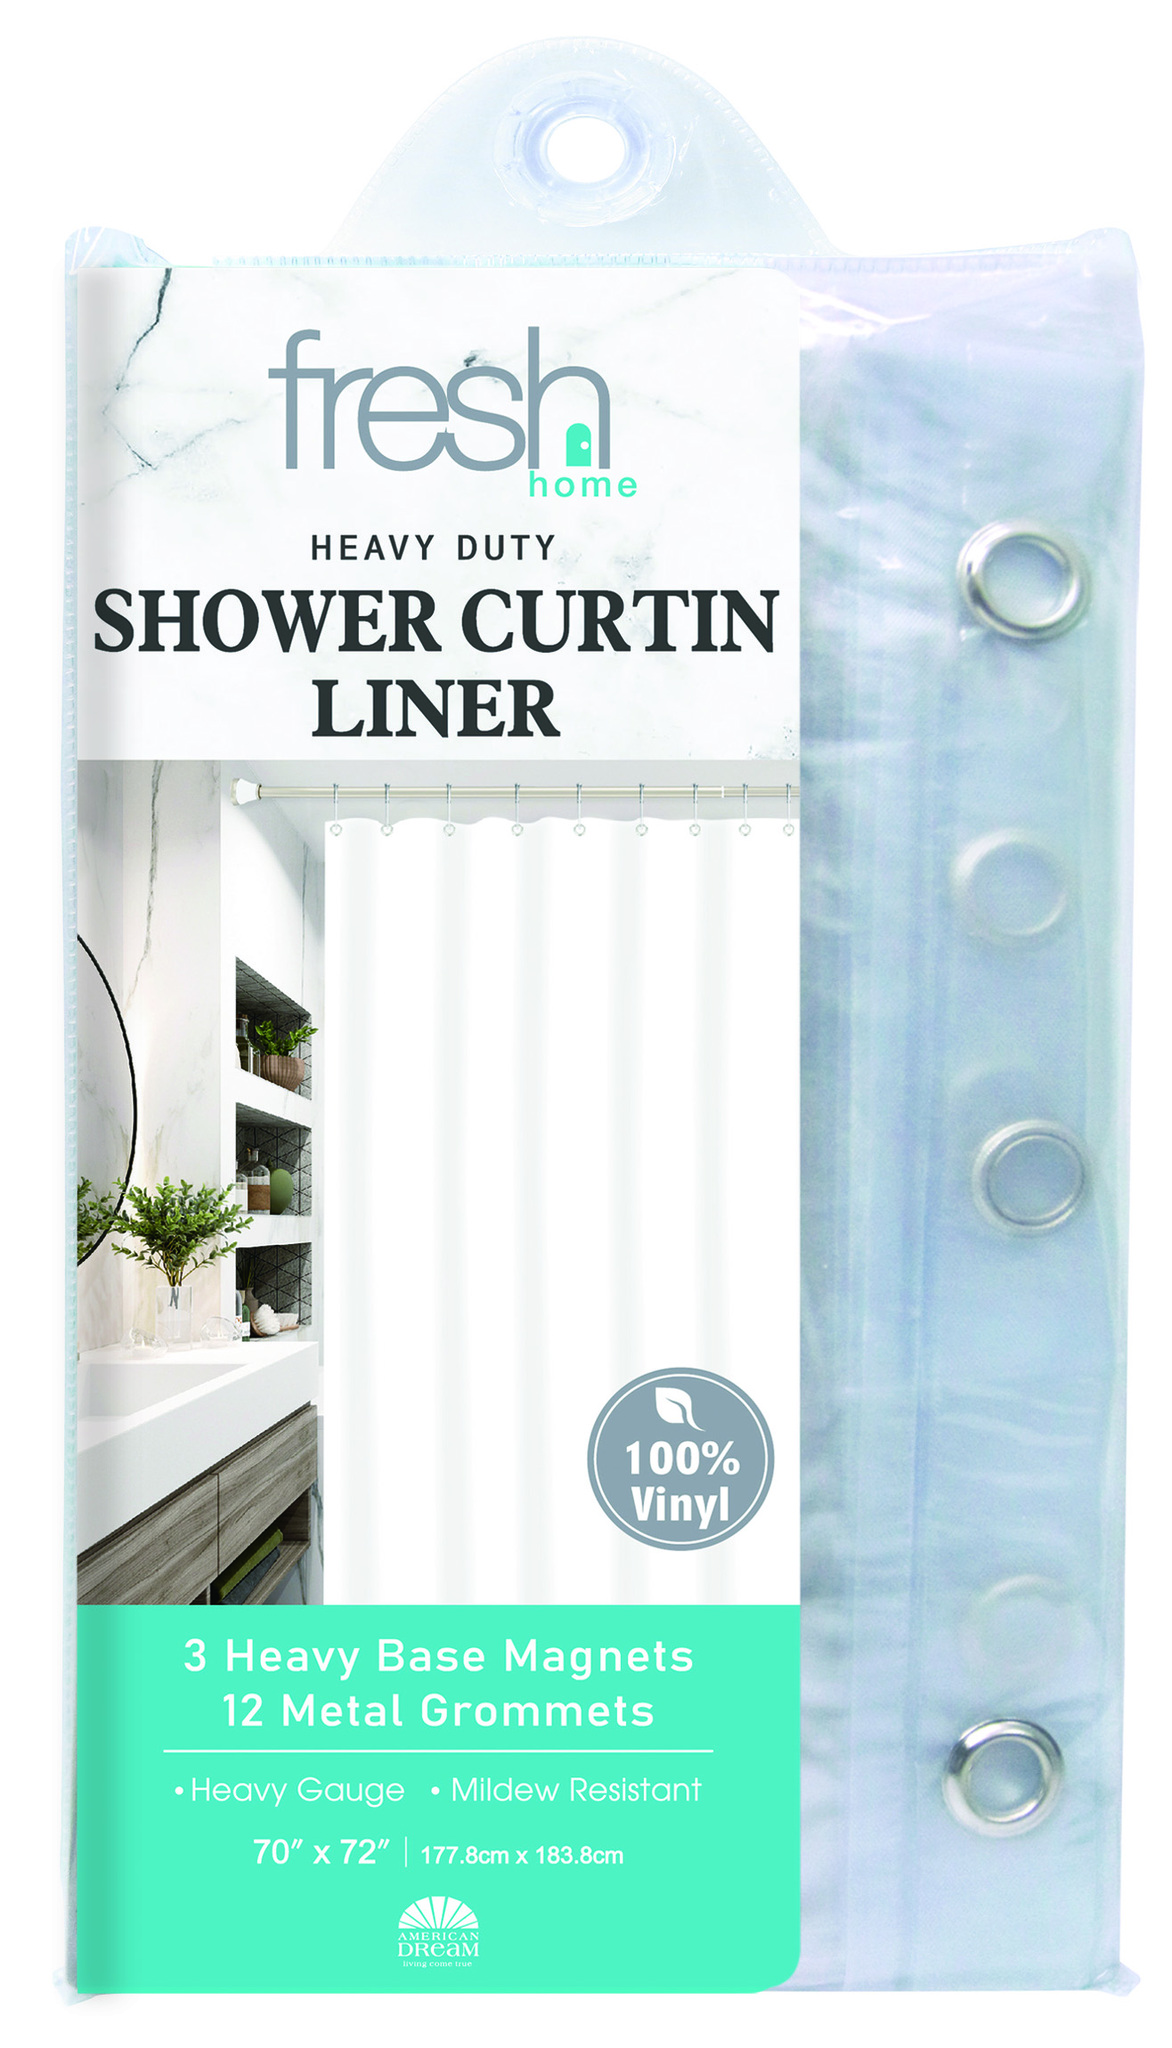 Clawfoot Tub Vinyl Shower Curtain Clear Without Magnets//CL